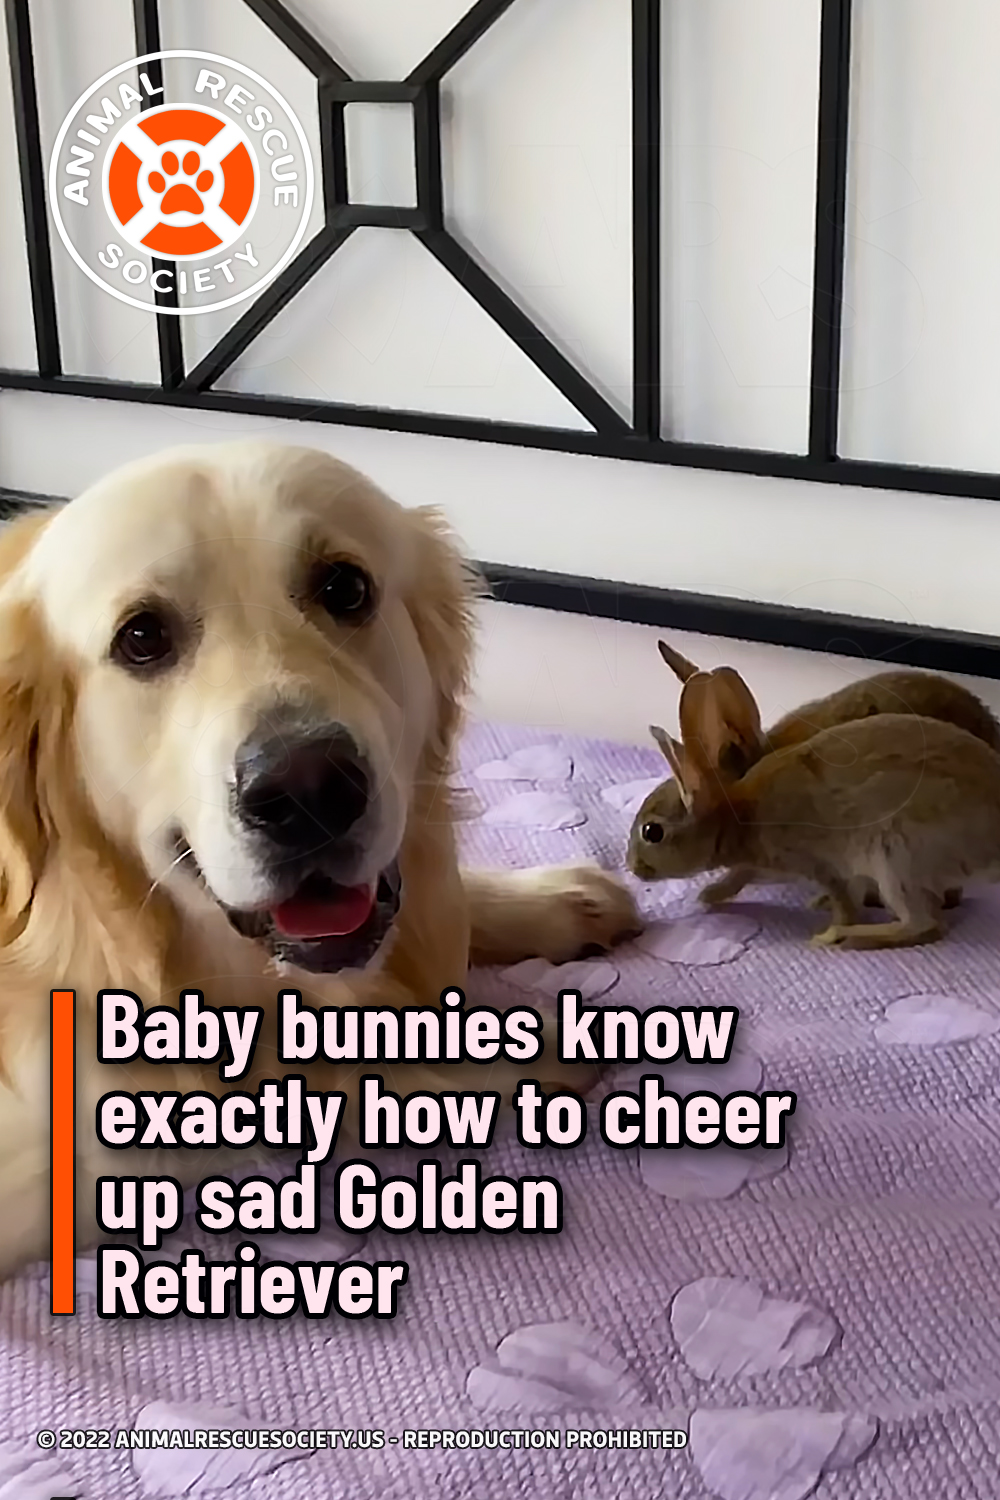 Baby bunnies know exactly how to cheer up sad Golden Retriever